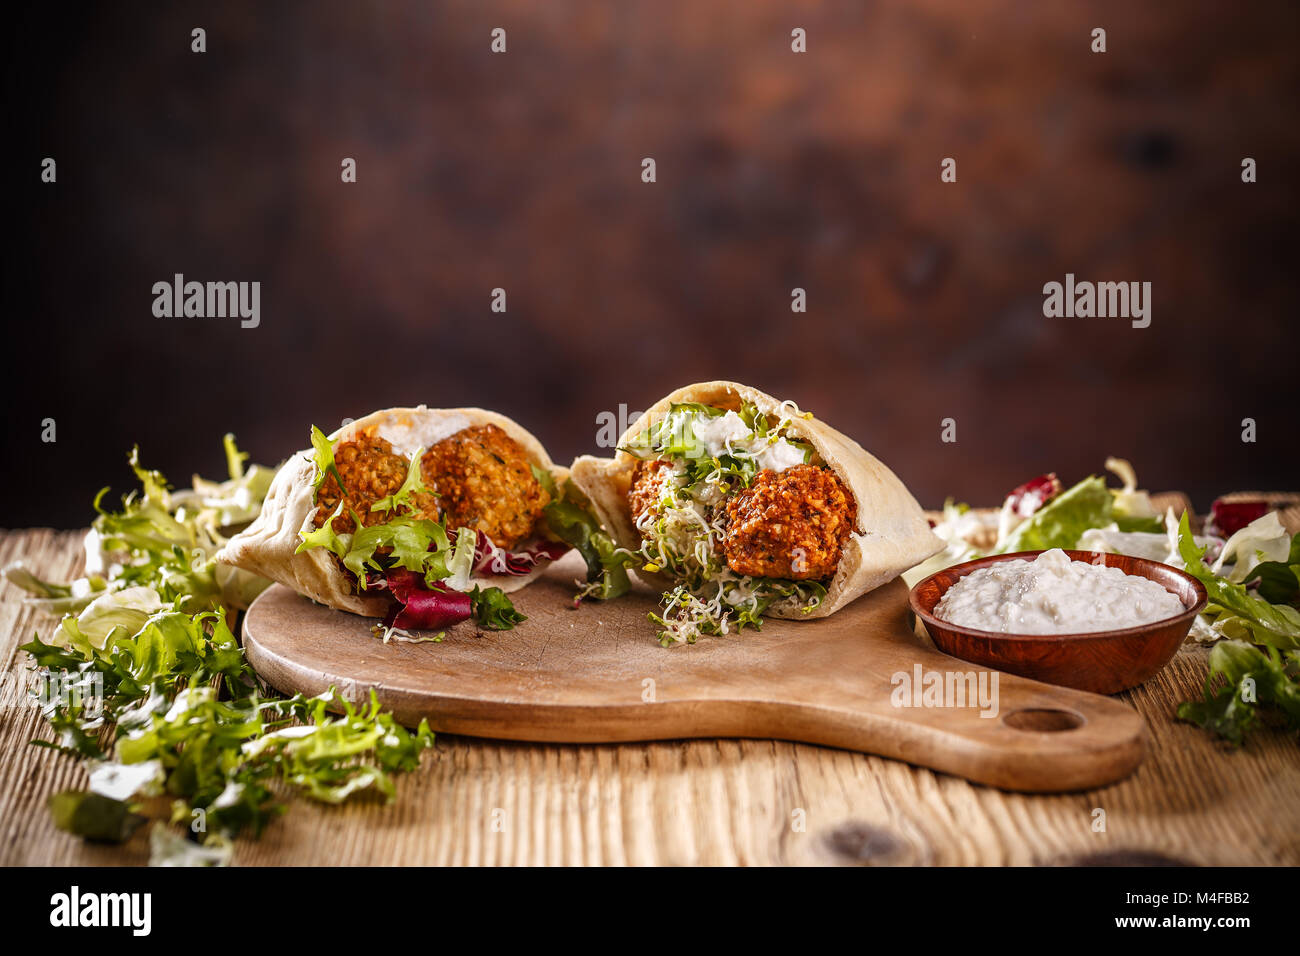 Pita bread filled with falafel, salad and white sauce Stock Photo